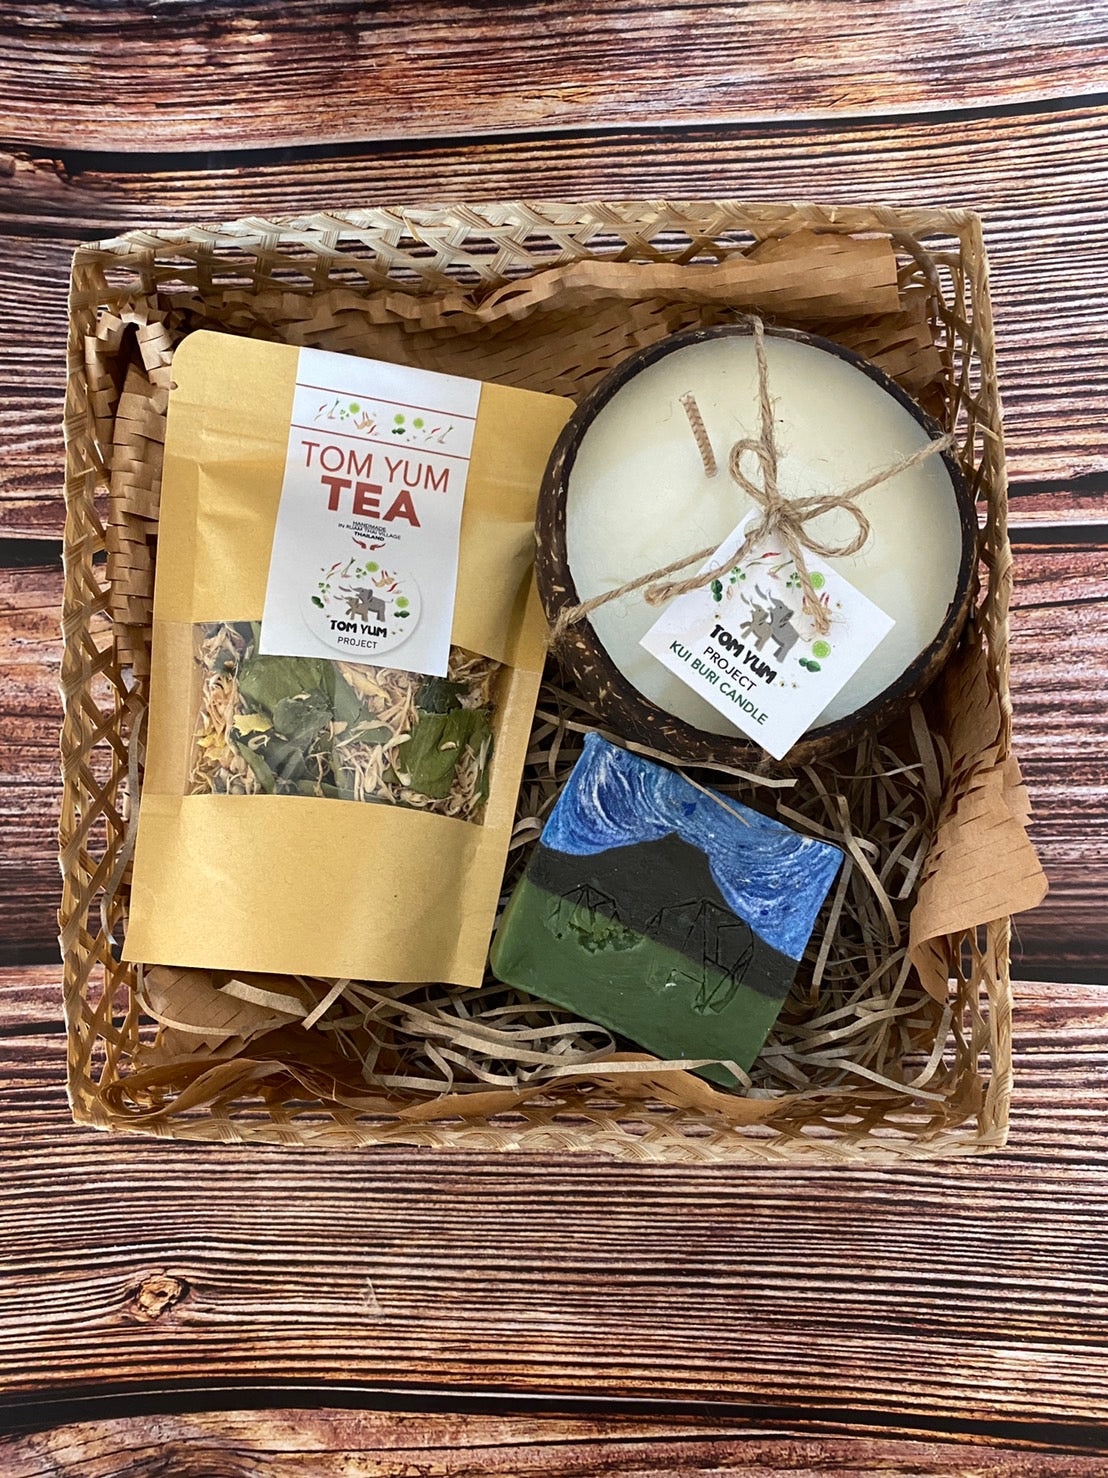 Elephant friendly gift box from Tom yum project